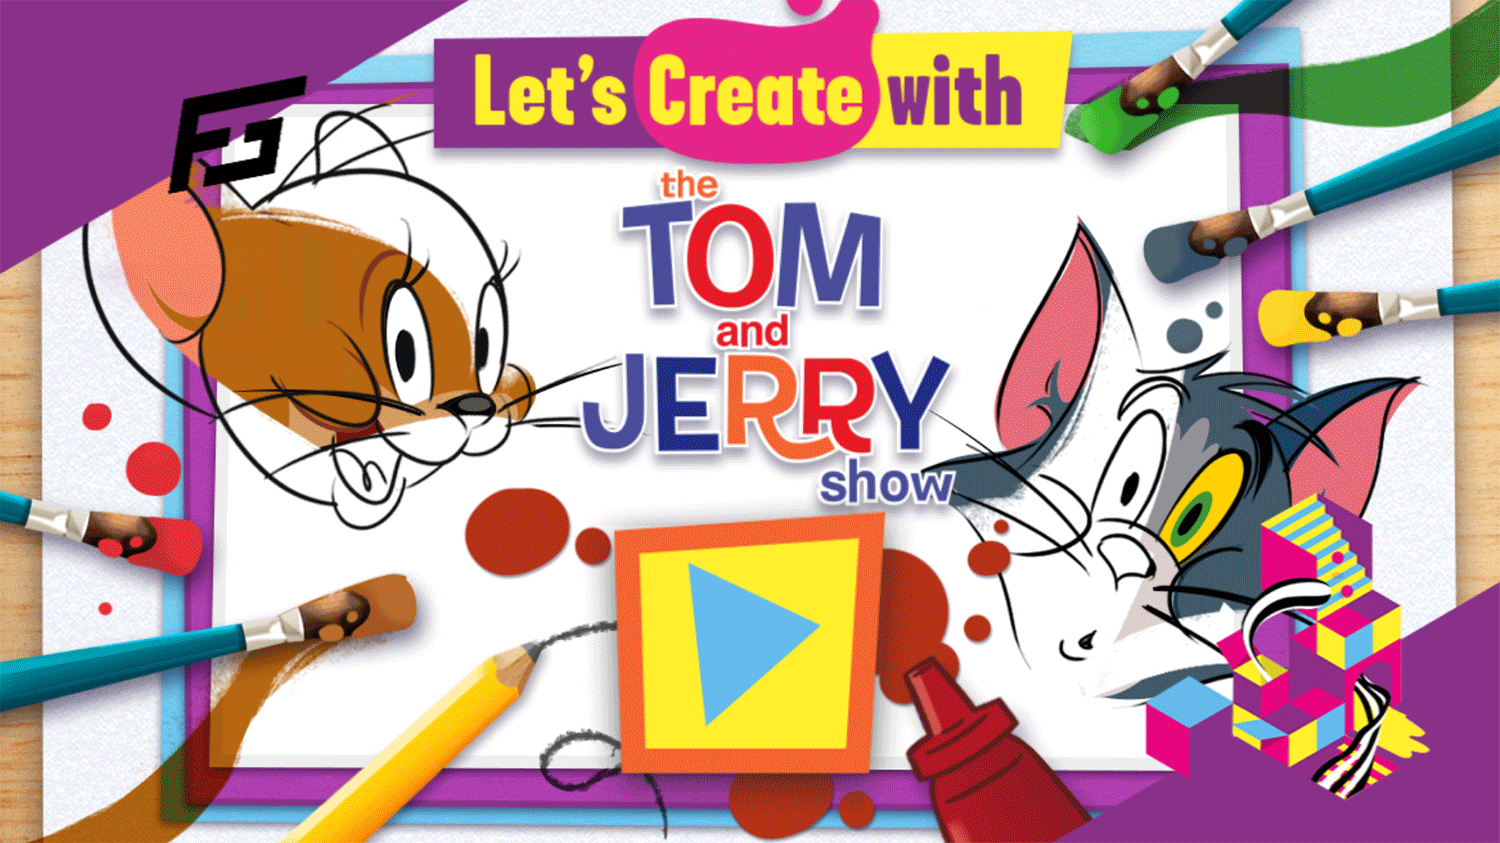 Tom and Jerry Let's Create Welcome Screen Screenshots.